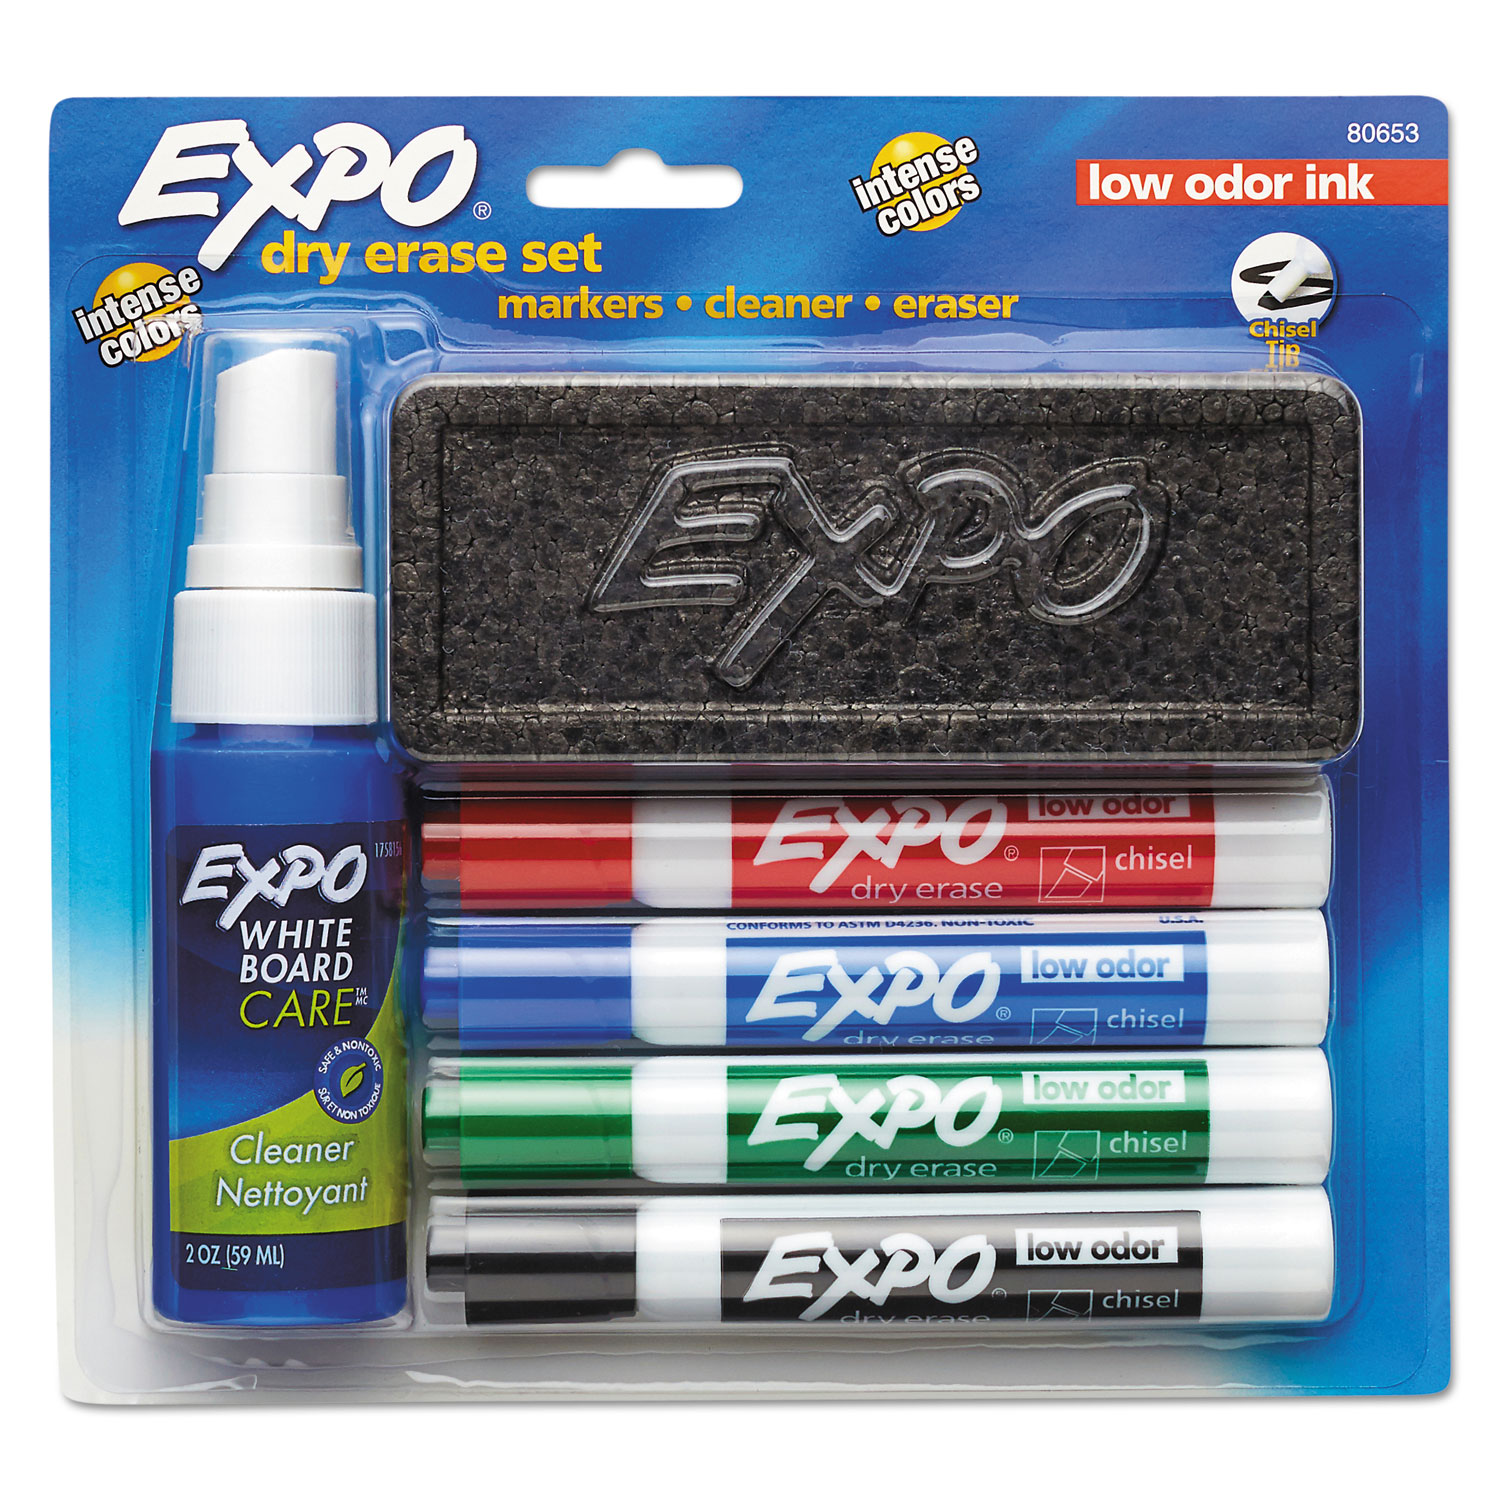 Expo Low Odor Dry Erase Markers, Chisel Tip - Office Pack, Assorted